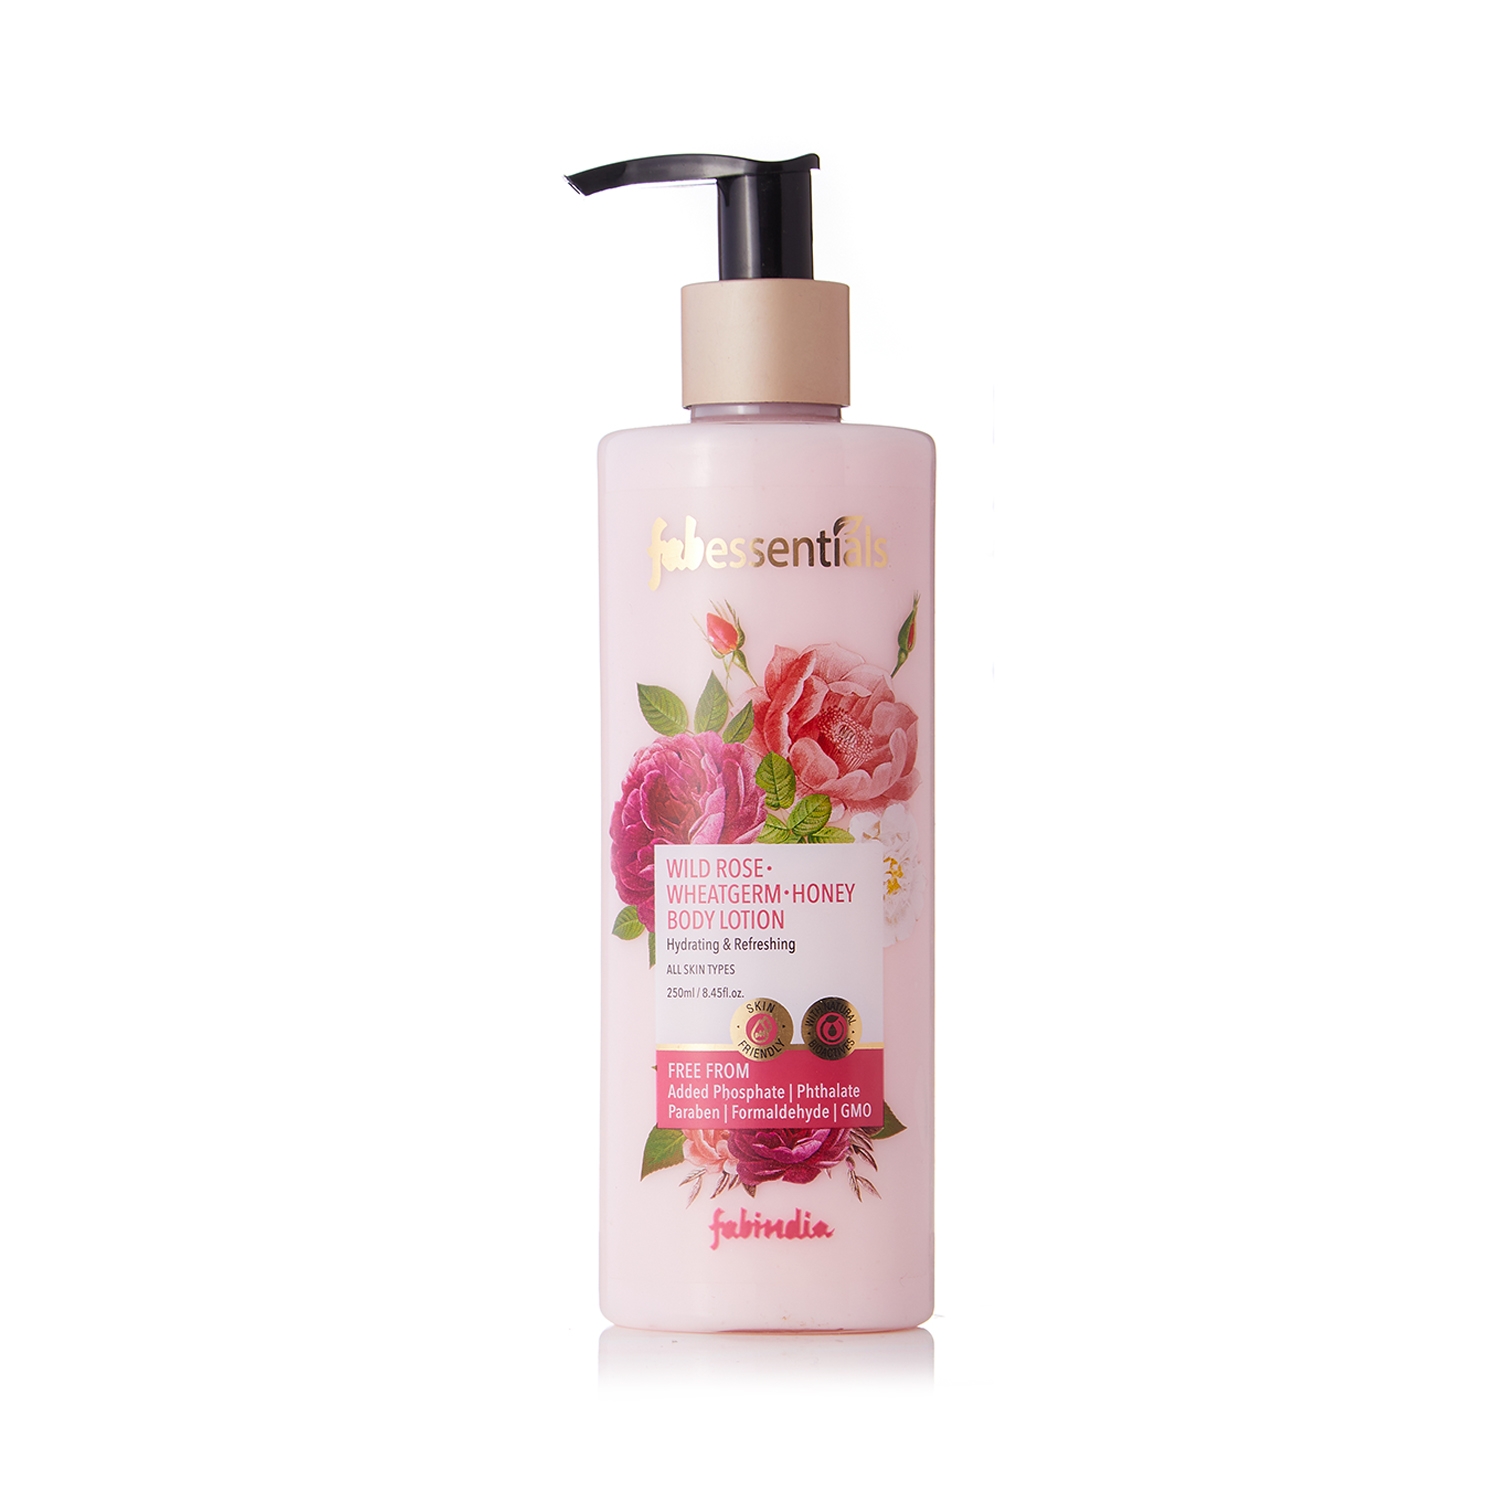 Fabessentials by Fabindia | Fabessentials by Fabindia Wild Rose Wheatgerm Honey Body Lotion (250ml)